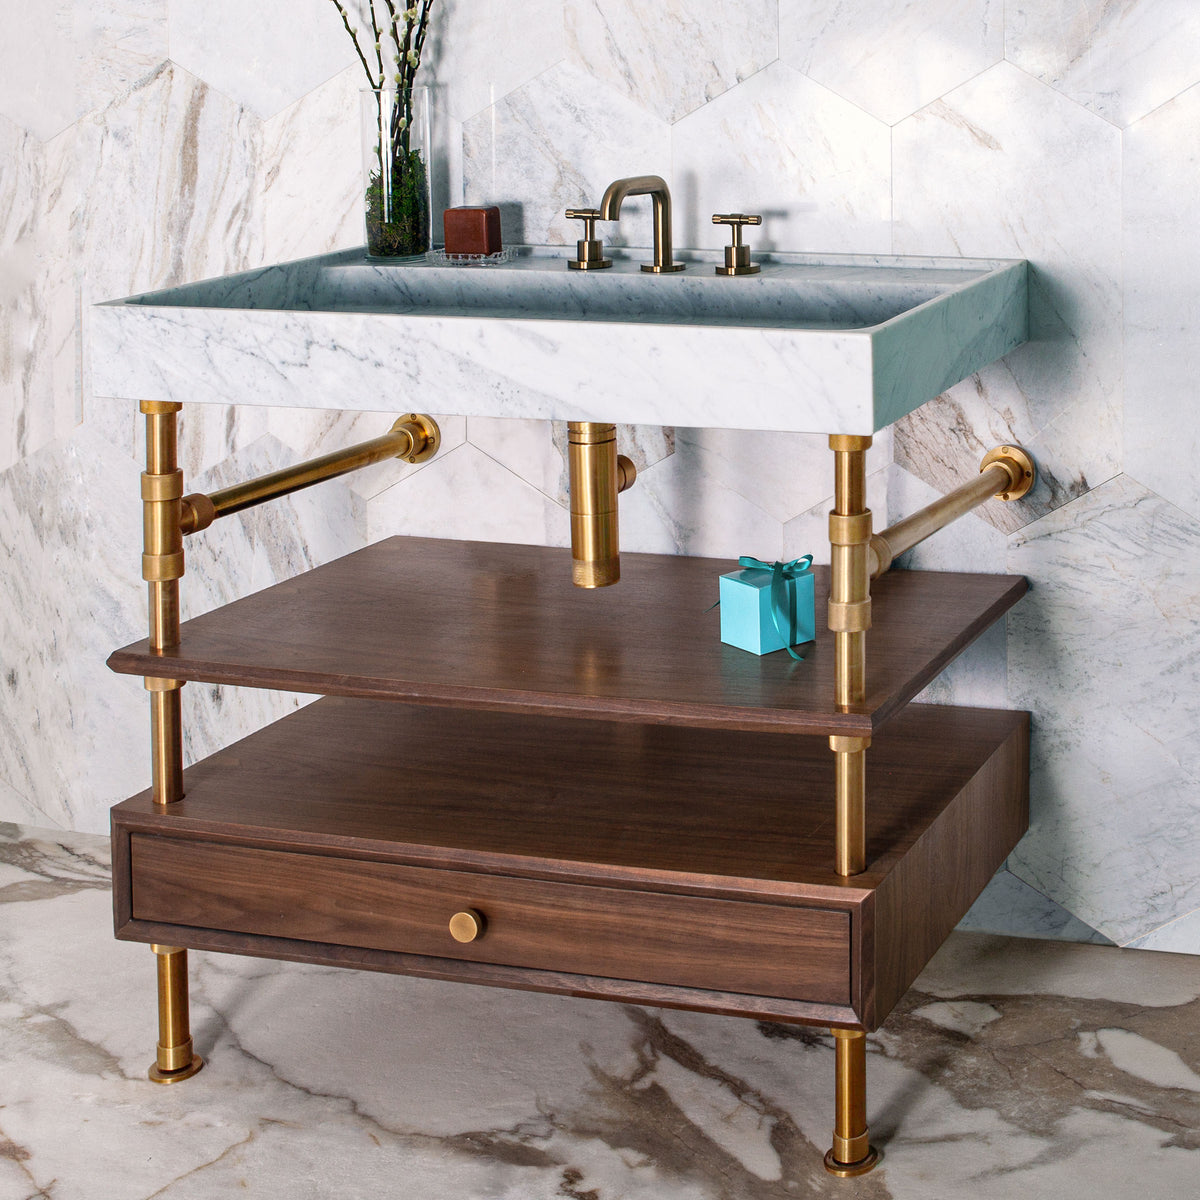 Ventus Bath Sink with Faucet Deck in carrara marble paired with Elemental Classic Console Vanity in aged brass with walnut wood image 1 of 2